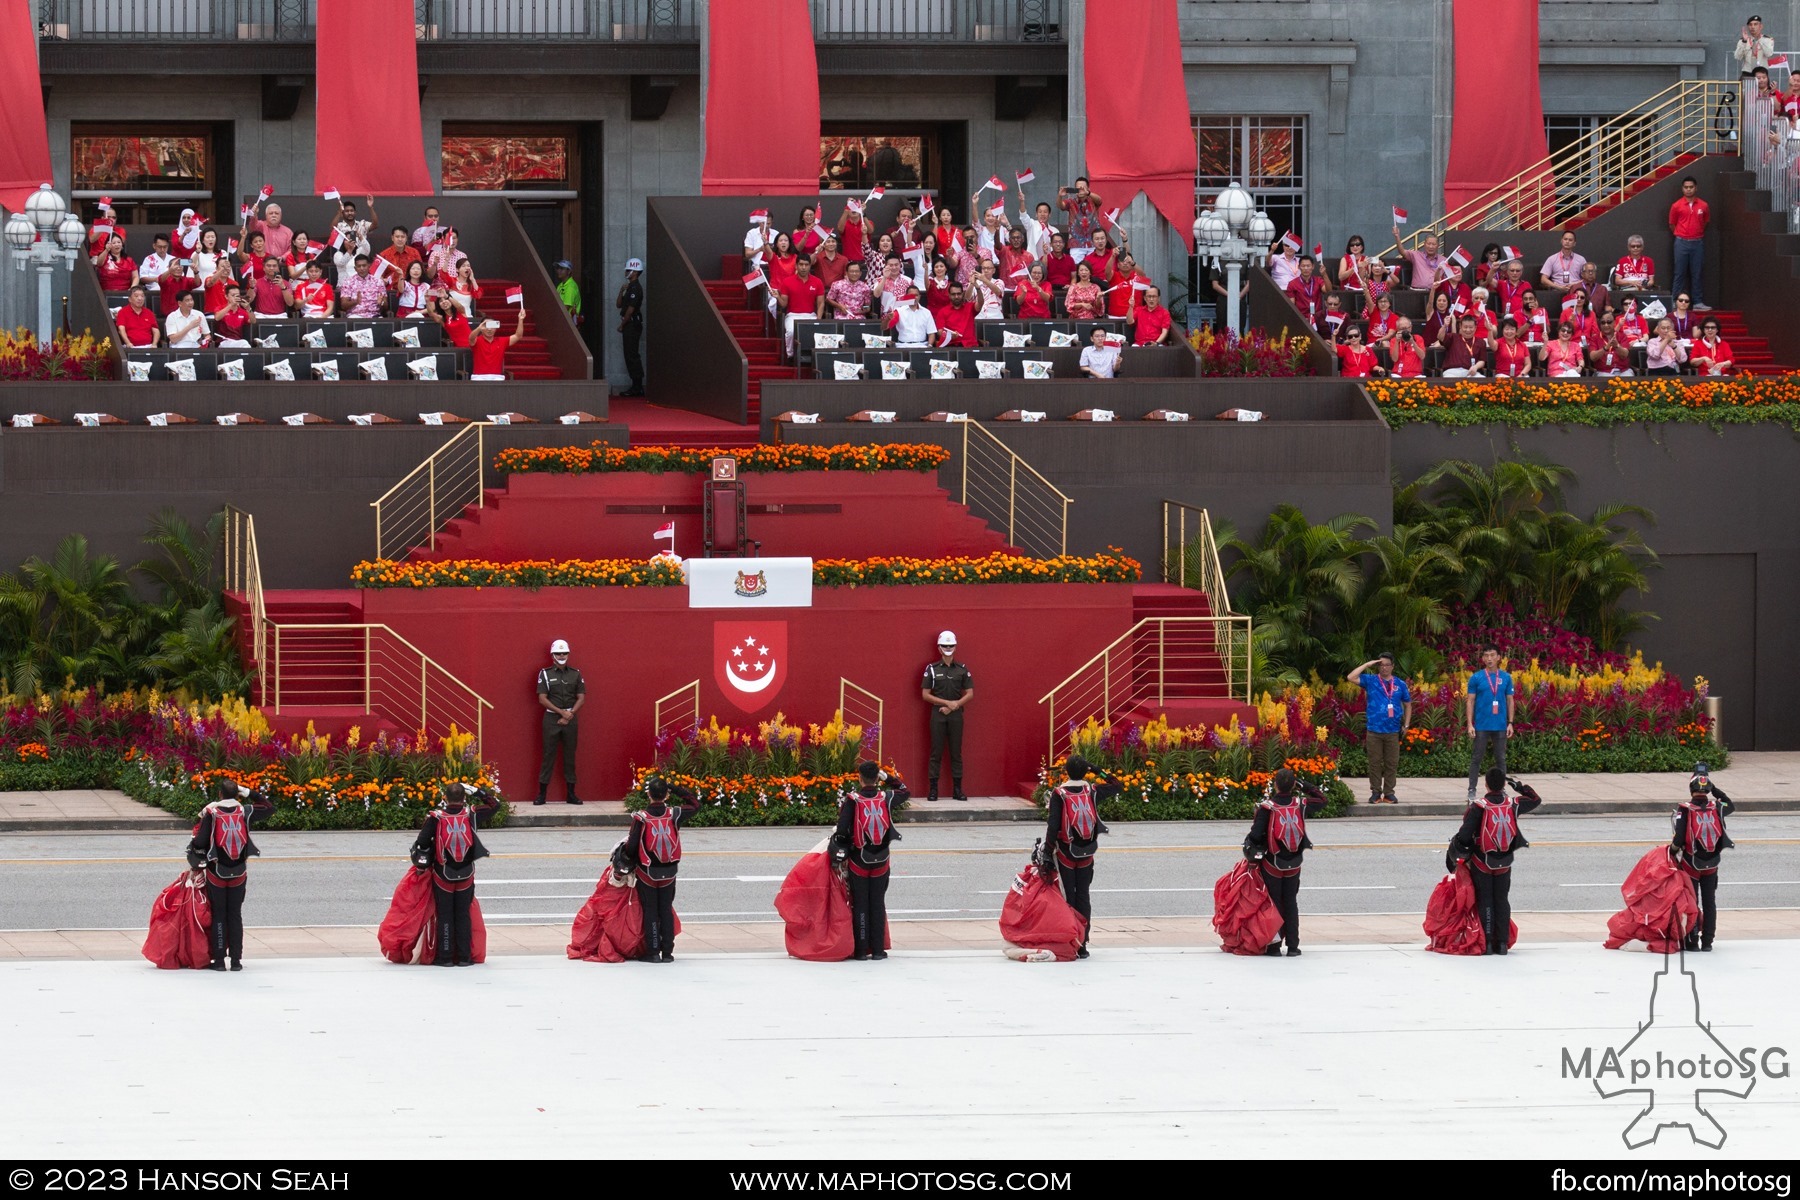 The Red Lions saluting the seated Members of the Parliament to conclude their segment of the show.